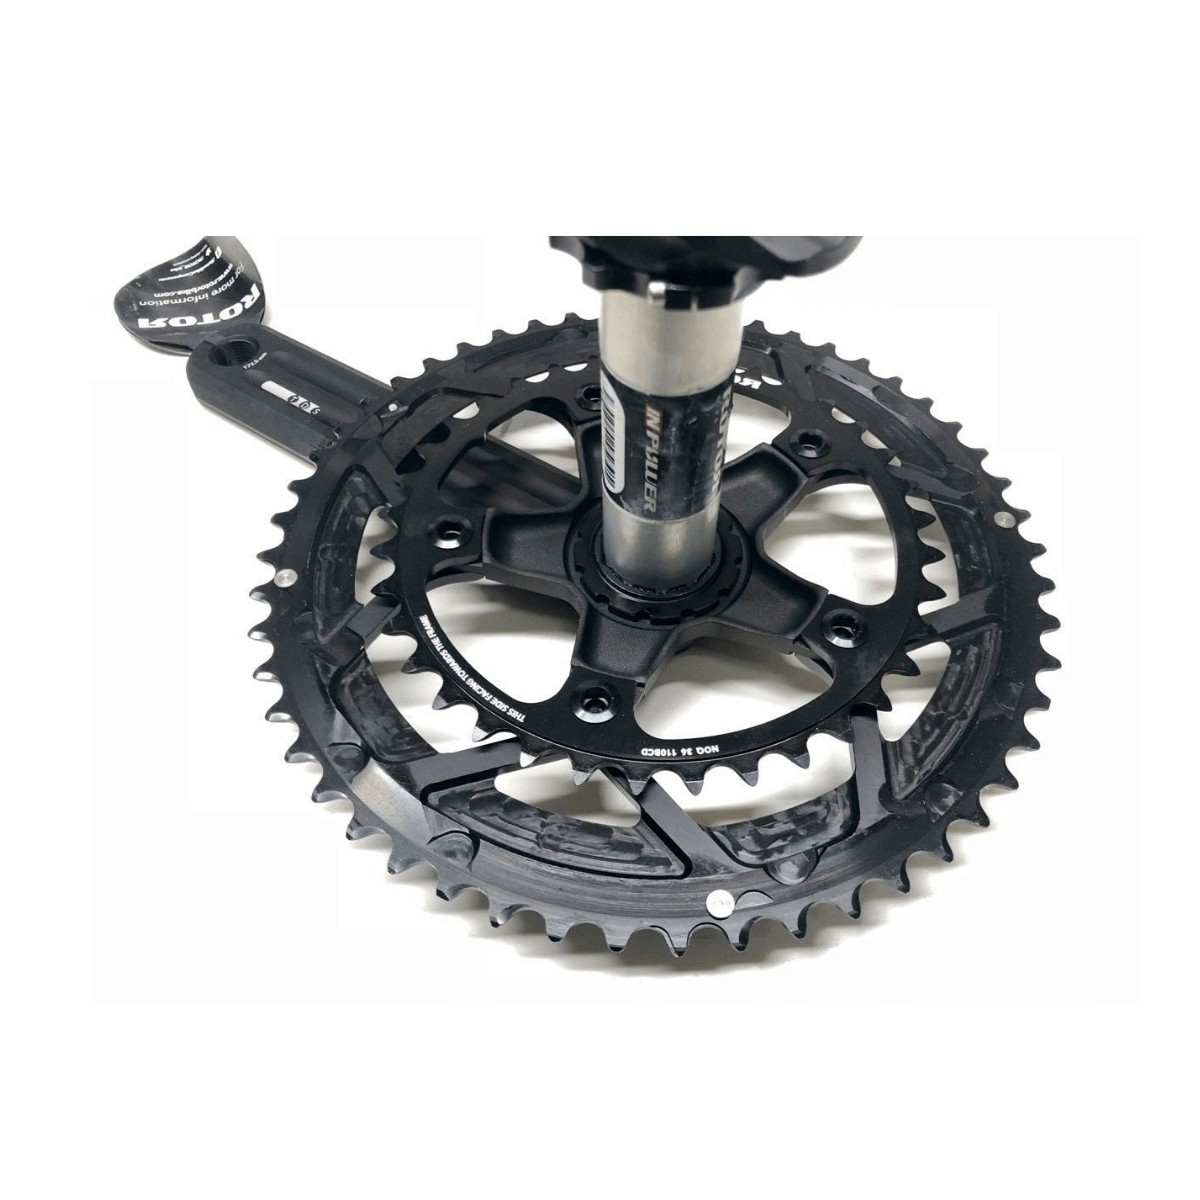 Rotor 3D + cranks with INpower power meter + NoQ 50/34 round chainrings, Connecting Rod Length 172,5 mm